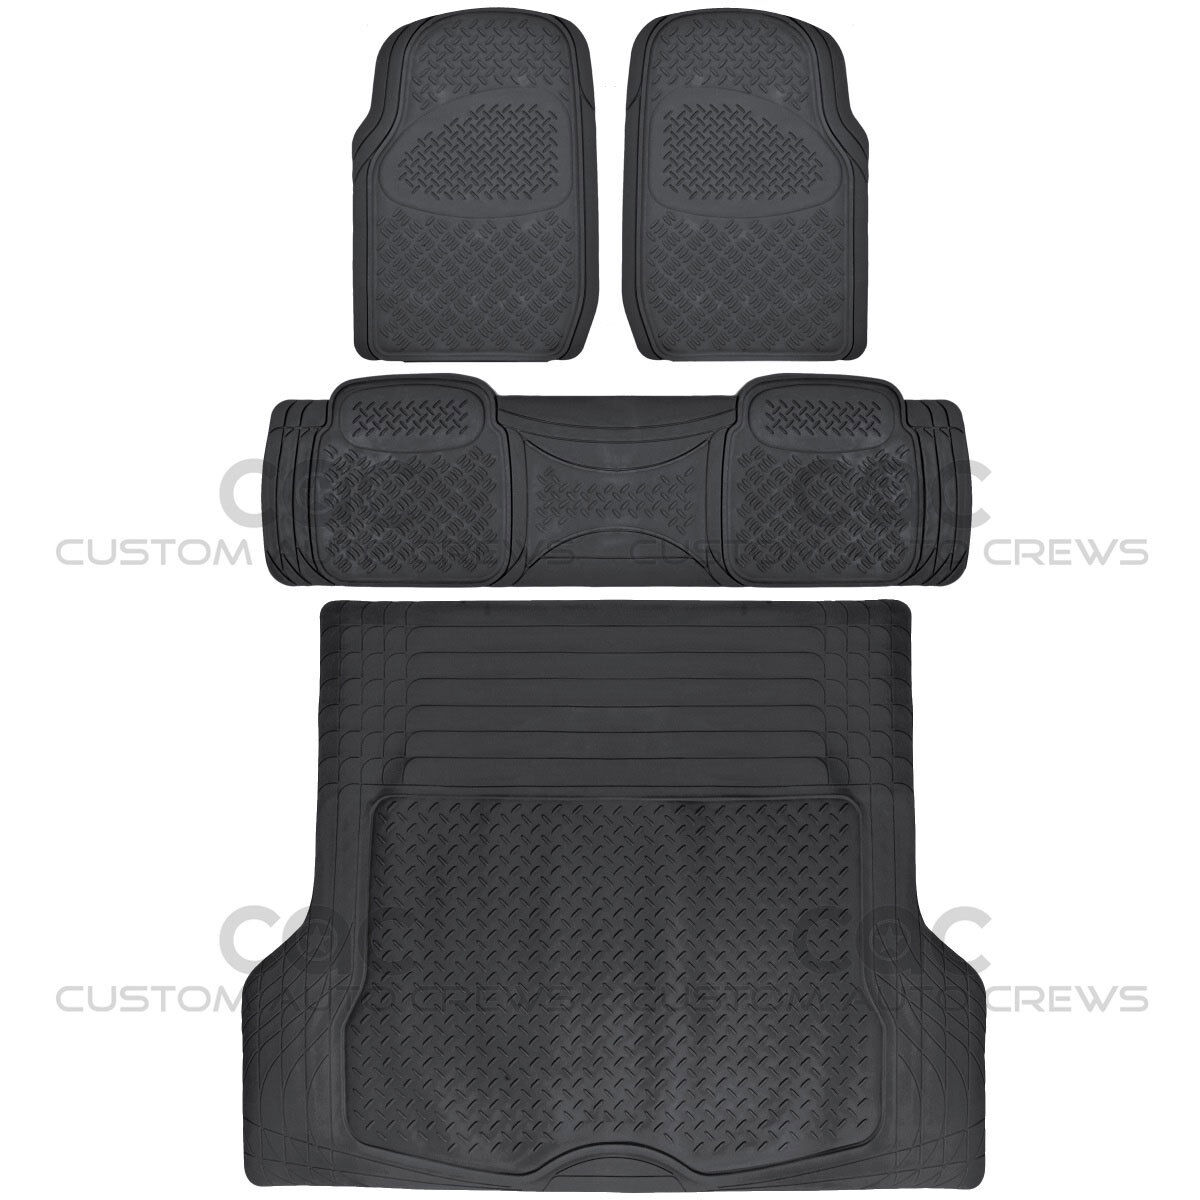 4pc Full Set All Weather Heavy Duty Rubber Black SUV Floor Mats Trunk Liner⭐⭐⭐⭐⭐